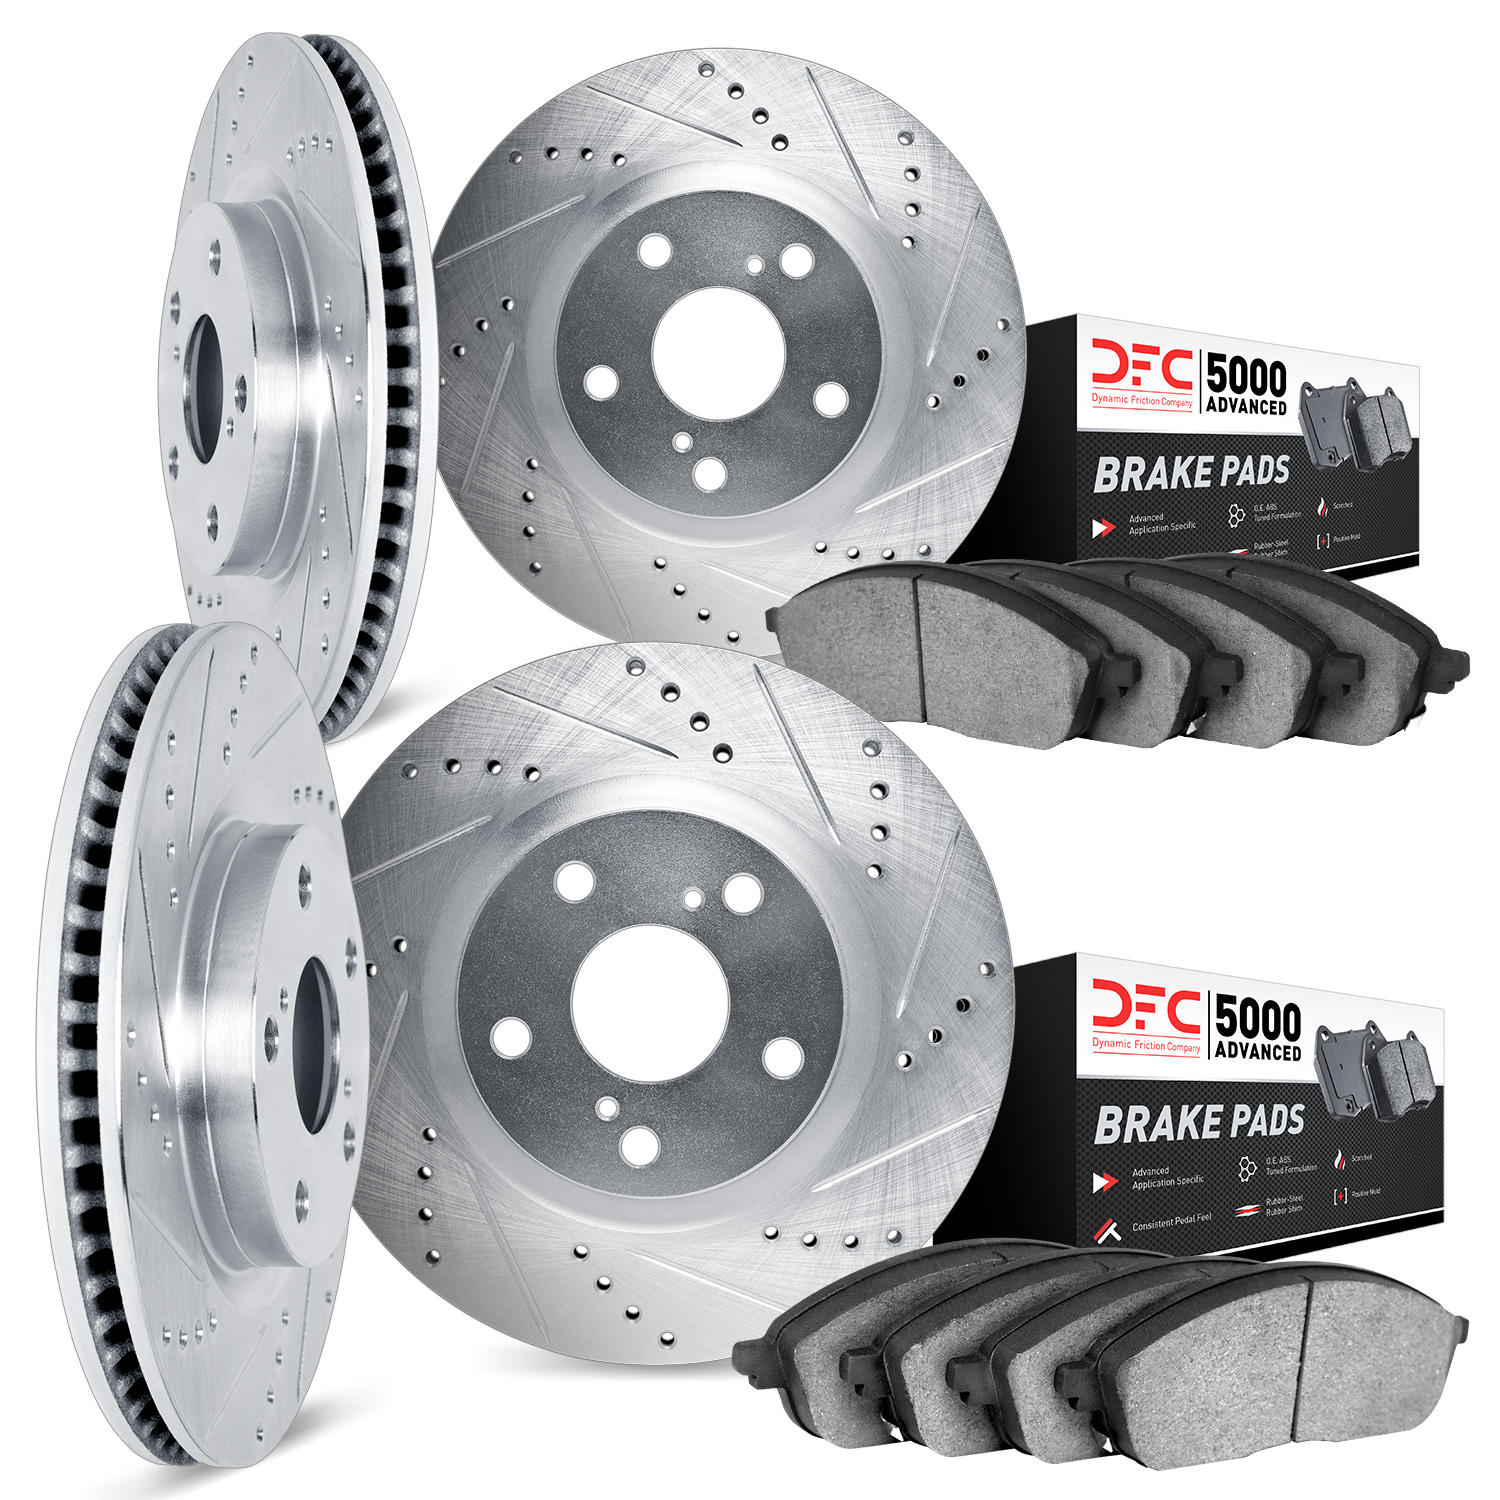 7504-31030 Drilled/Slotted Brake Rotors w/5000 Advanced Brake Pads Kit [Silver], 2007-2008 BMW, Position: Front and Rear